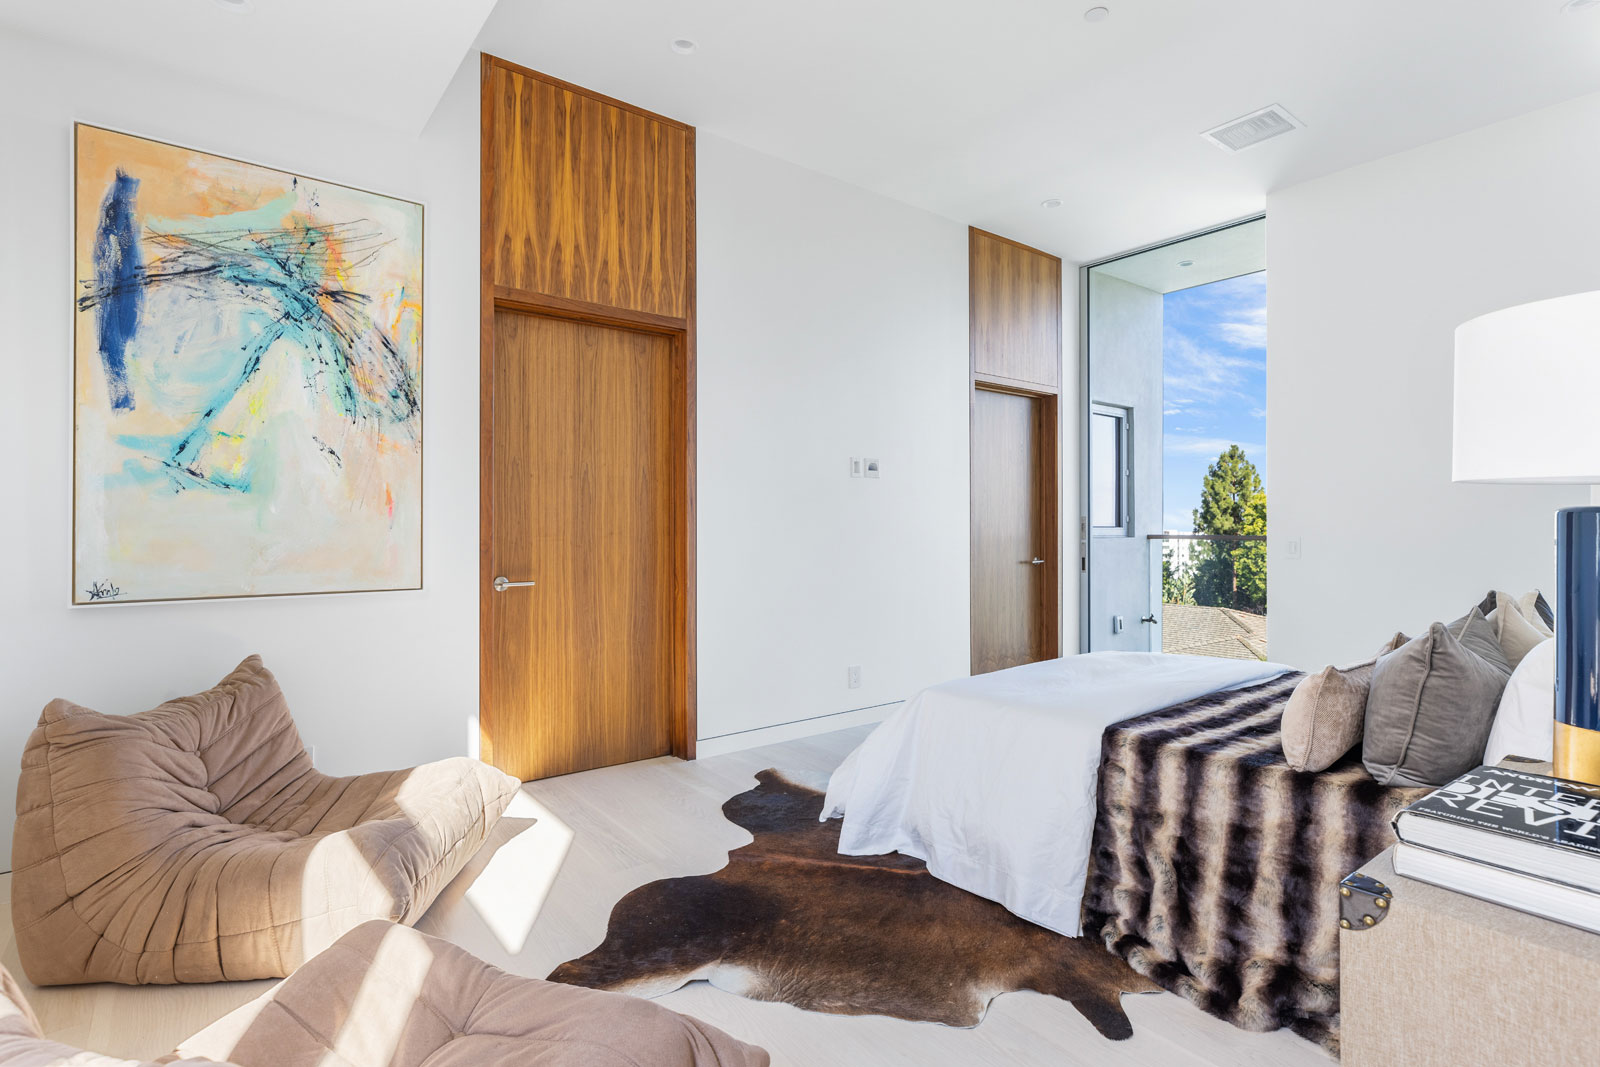 A secondary bedroom. Photo: © Anthony Barcelo, Barcelo Photography